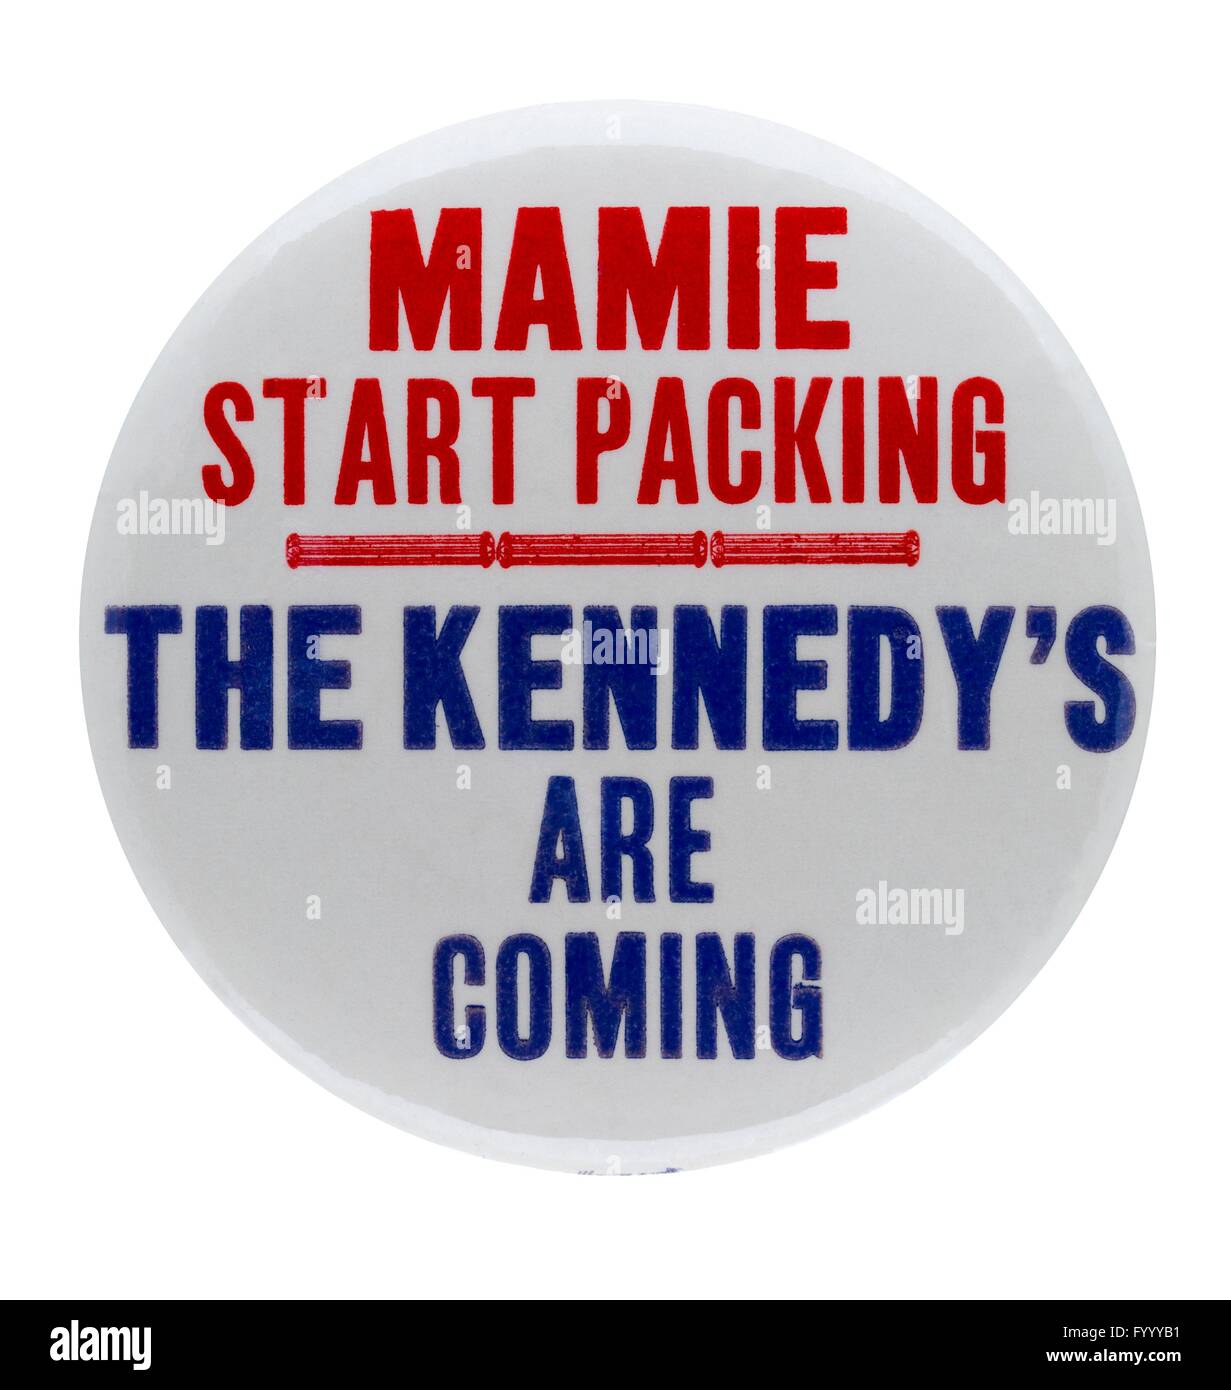 A 1960 humorous US presidential campaign button that makes reference to First Lady Mamie Eisenhower – “Mamie Start Packing' Stock Photo